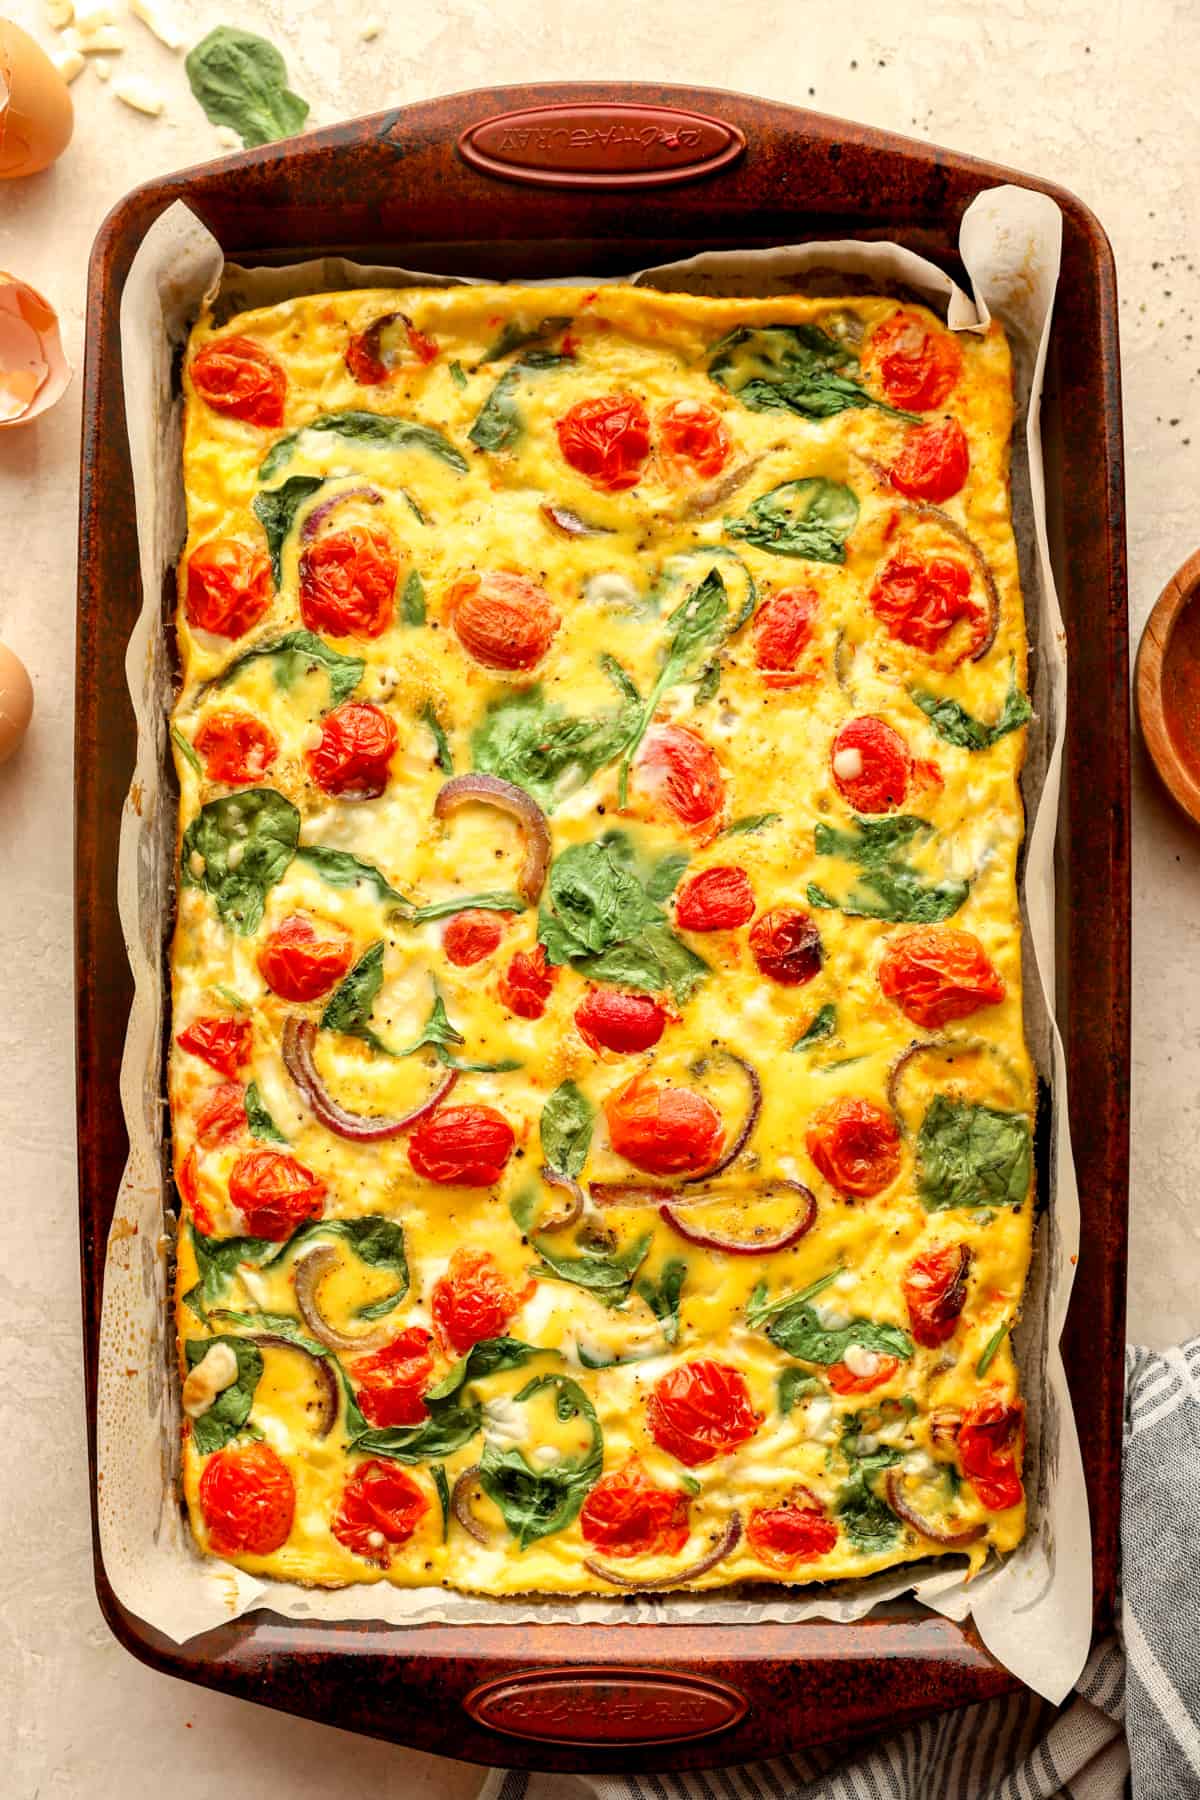 finished baked sheet pan eggs with spinach and tomato.